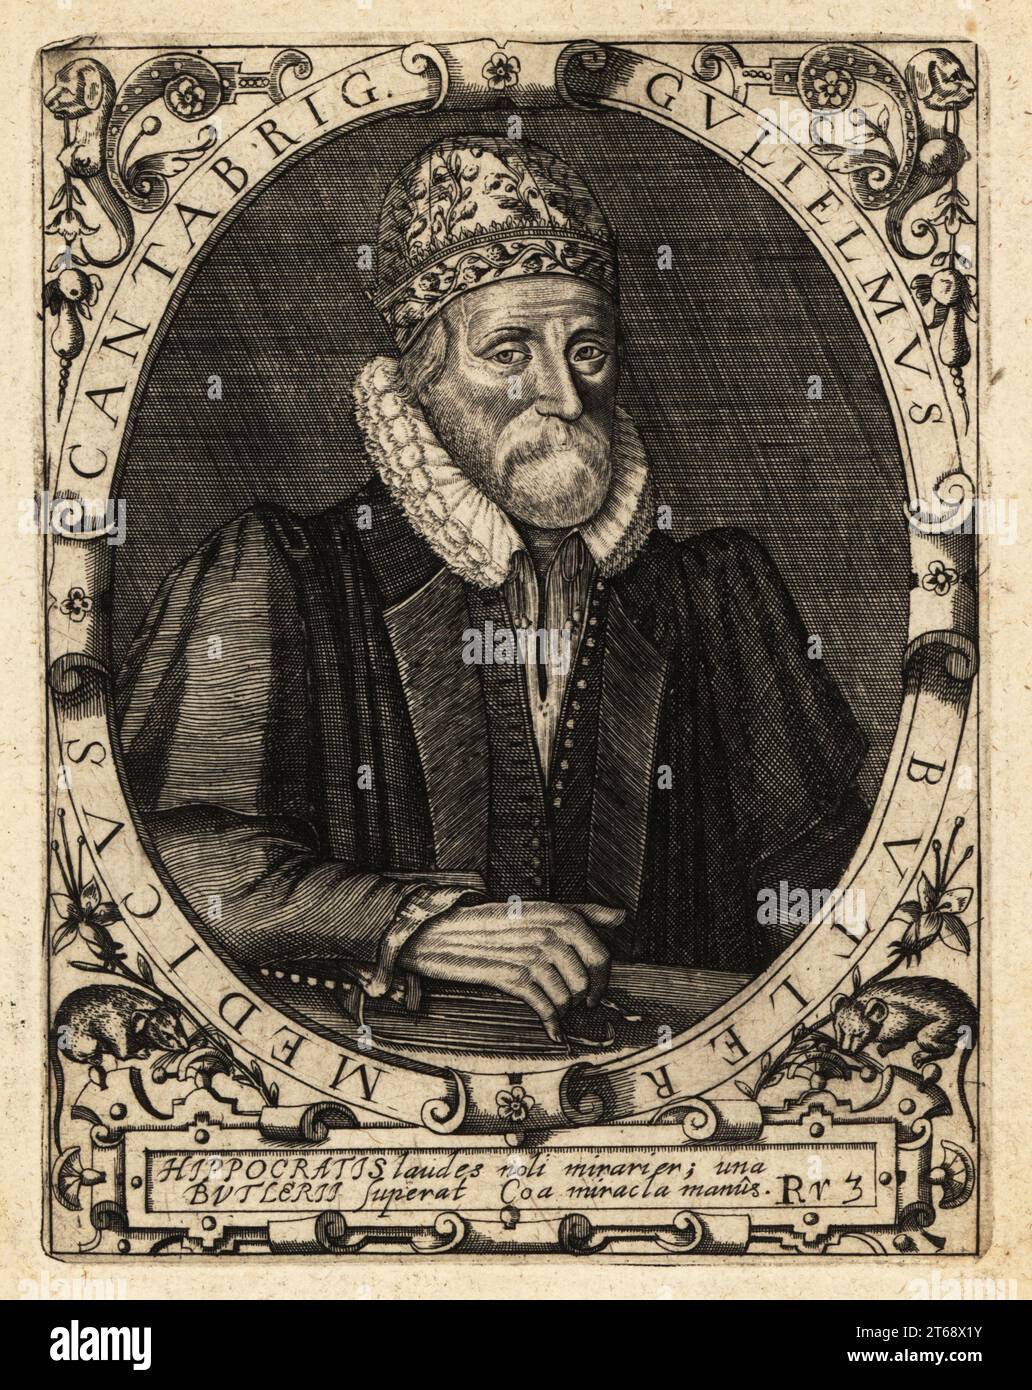 William Butler, English academic, physician and fellow of Clare College, Cambridge, 1535-1617. Guliemus Butler Medicus Cantabrig. Copperplate engraving by Johann Theodore de Bry from Jean-Jacques Boissards Bibliotheca Chalcographica, Johann Ammonius, Frankfurt, 1650. Stock Photo